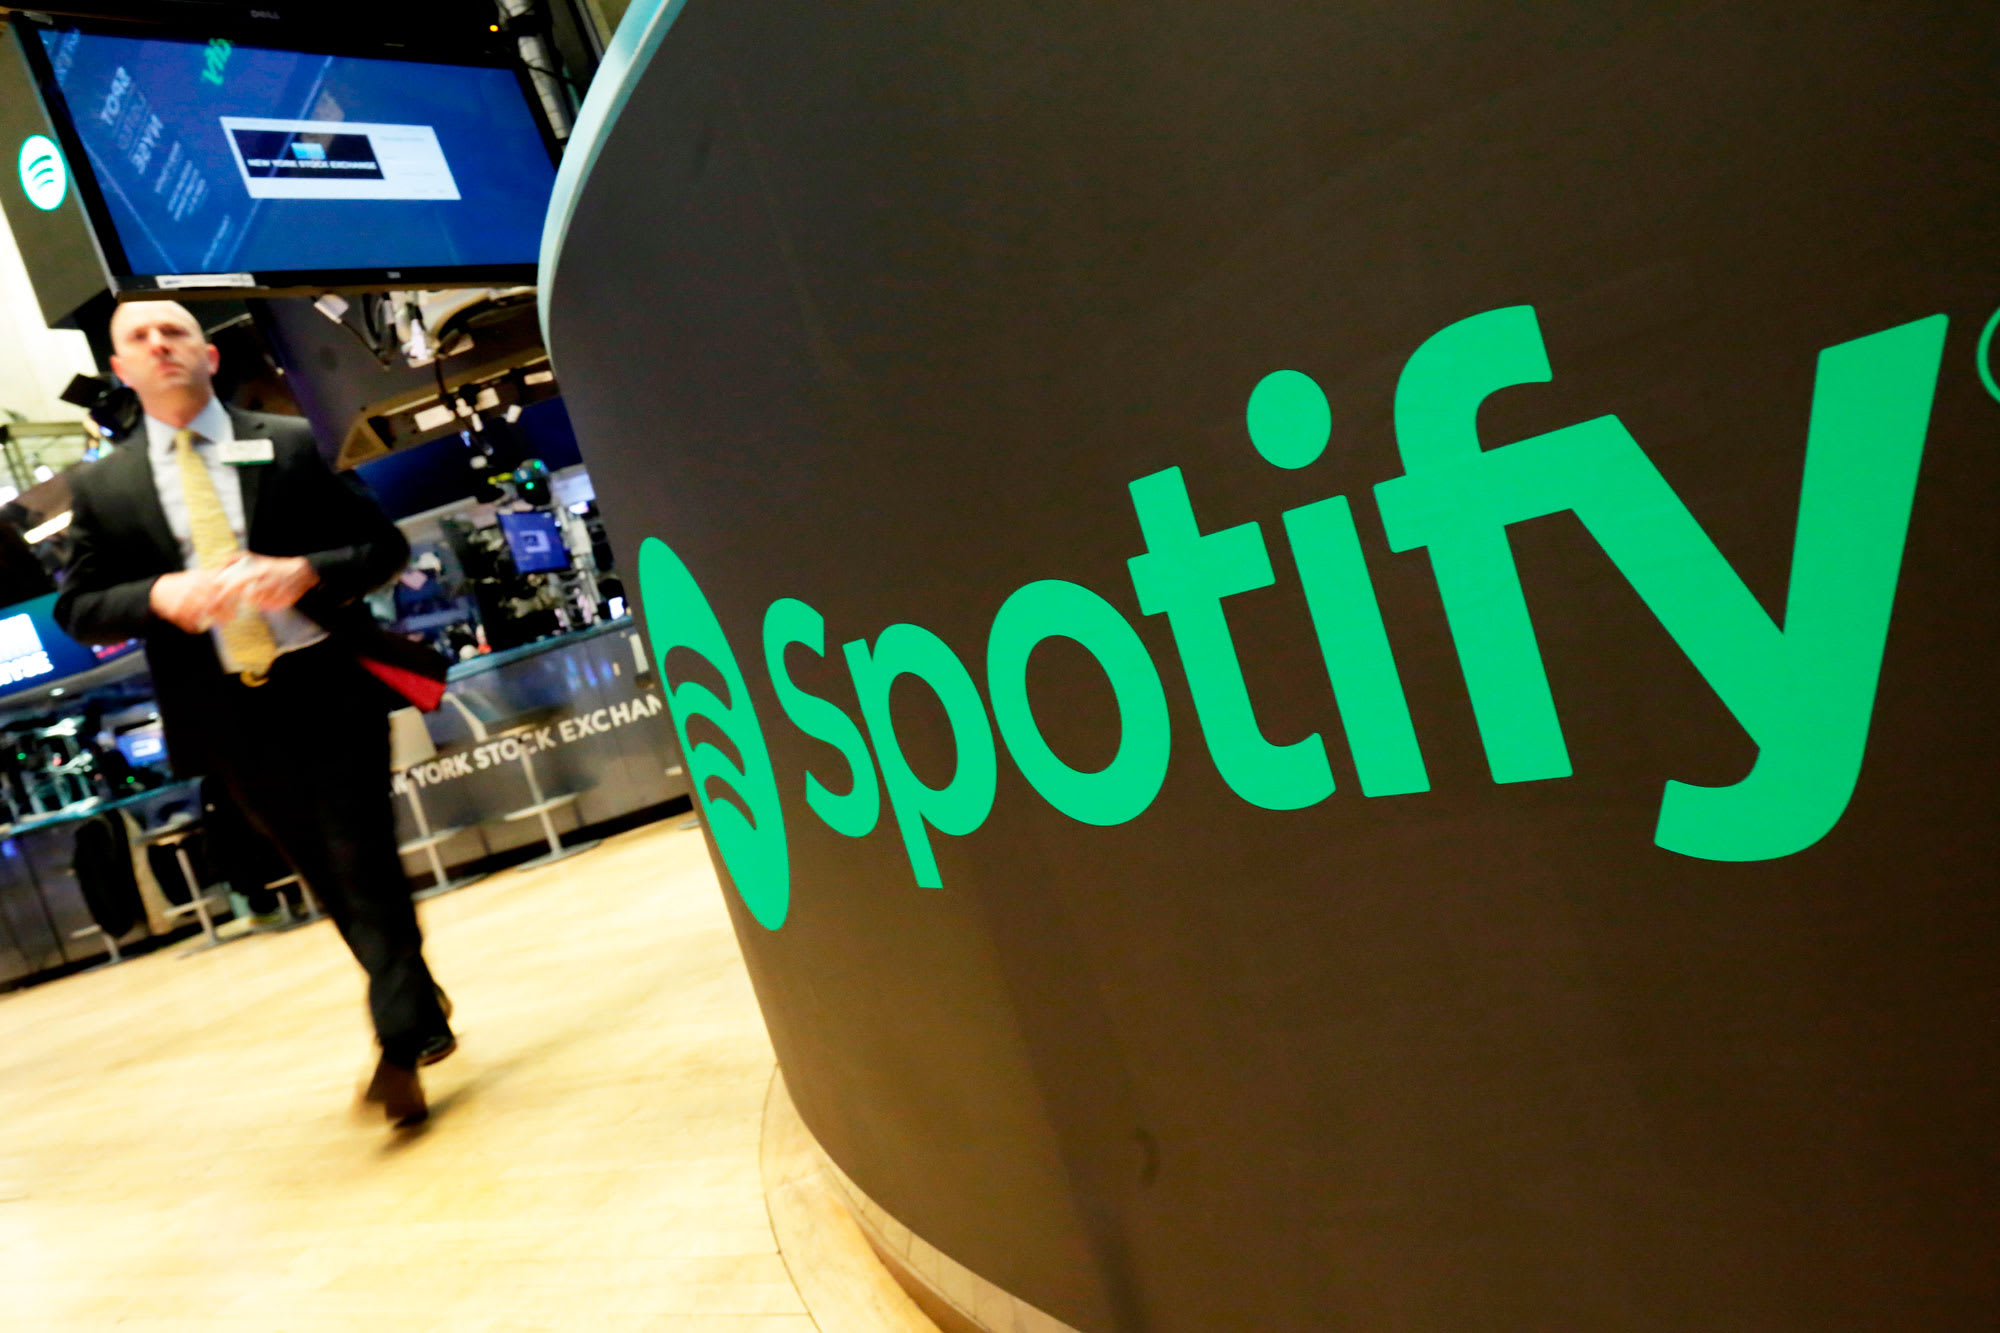 Spotify’s story is beginning to mirror Netflix’s, Jim Cramer says